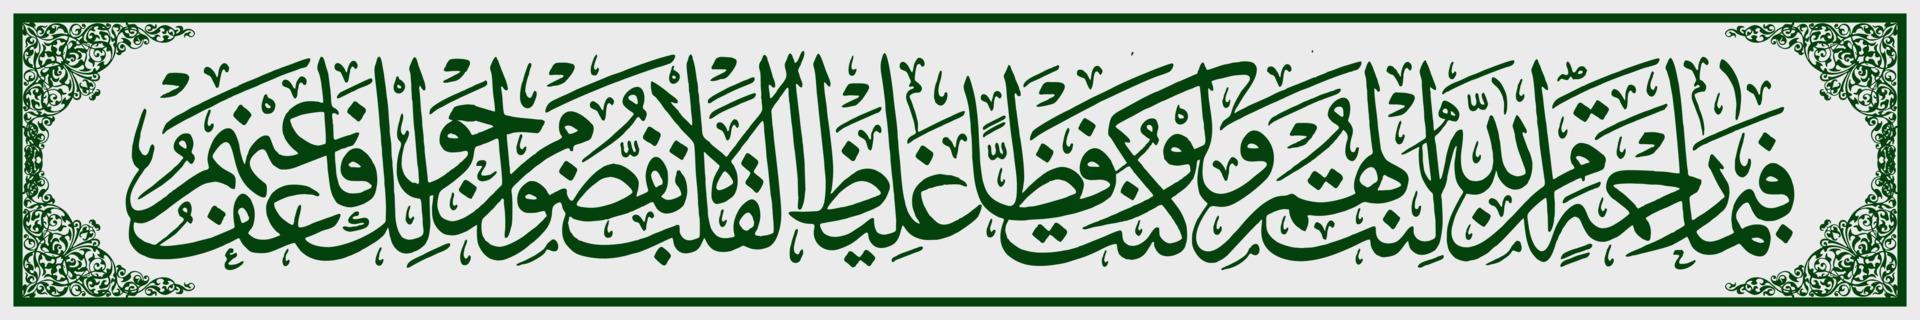 Arabic Calligraphy , Al Qur'an Surah Ali Imran 159, Translate then by the grace of Allah you Muhammad be gentle towards them. If you had been tough and rough-hearted, vector